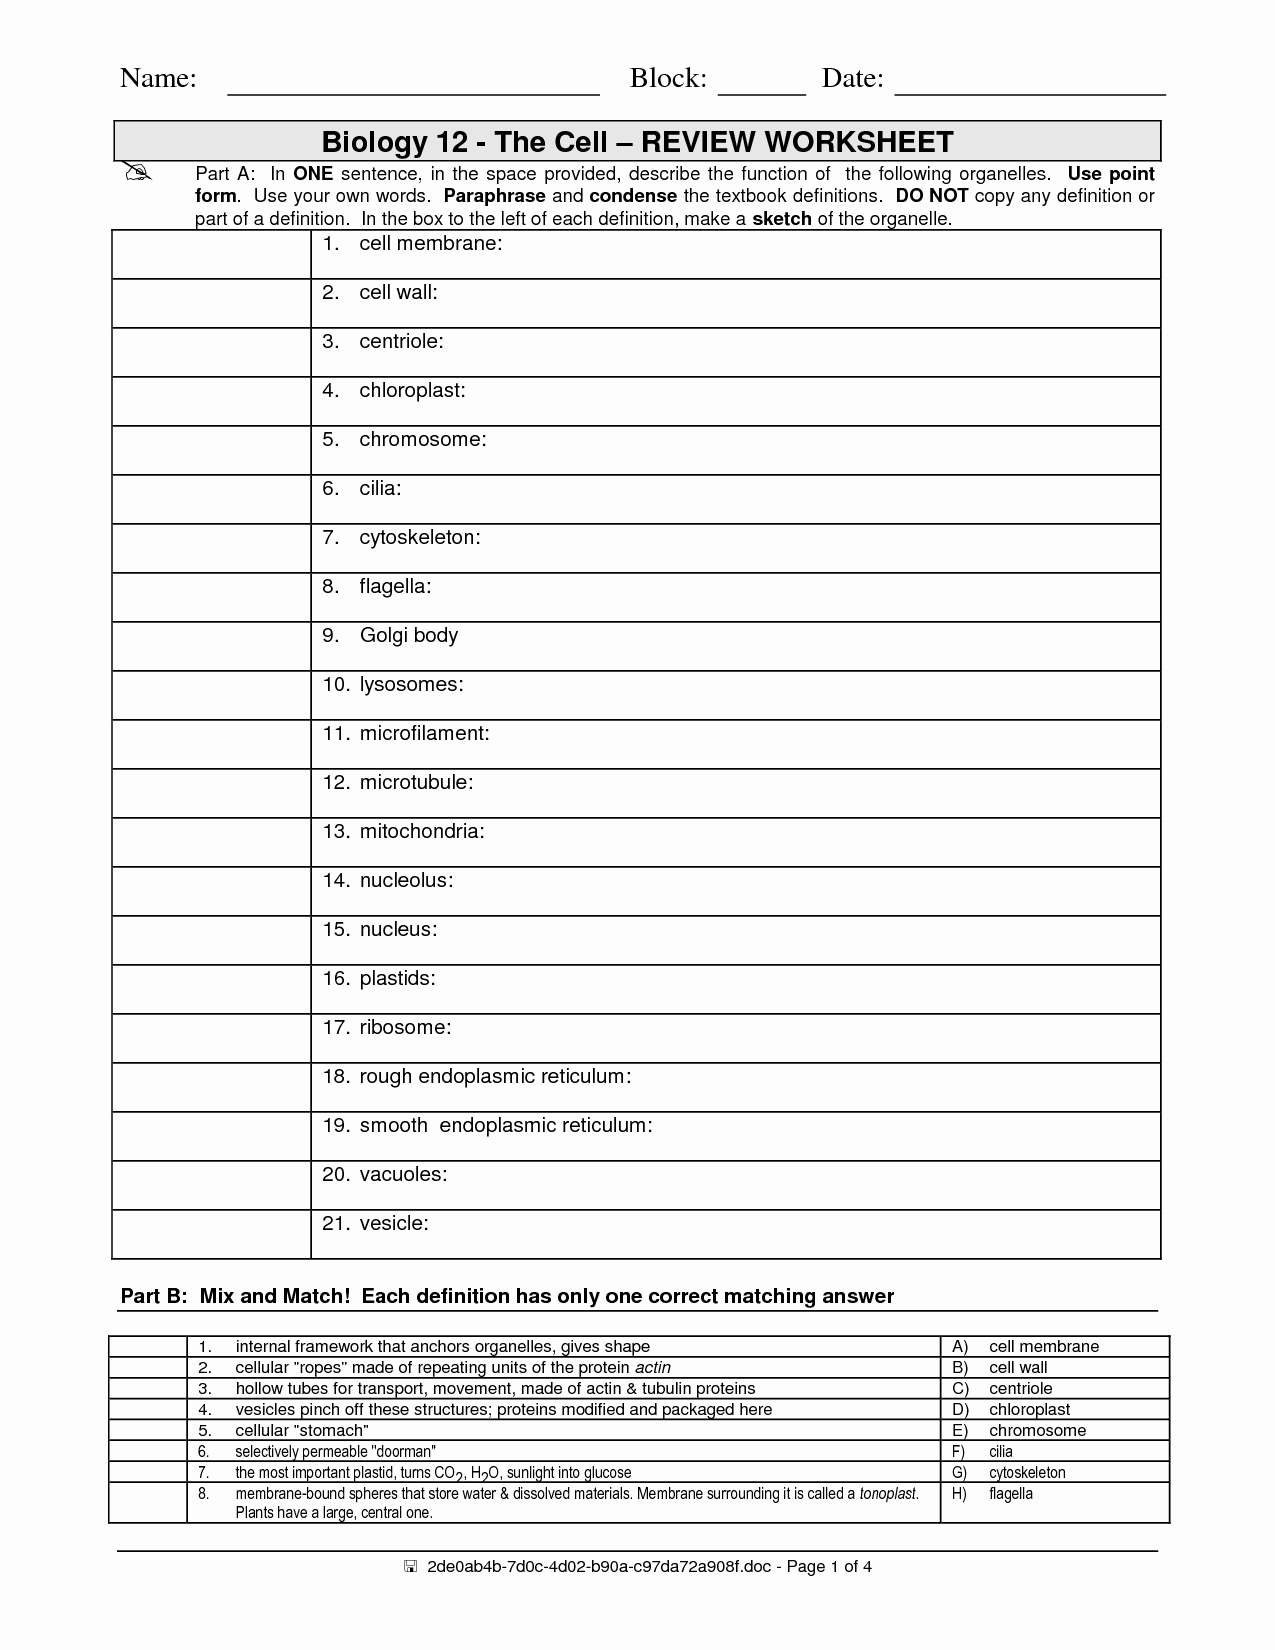 Cells and organelles Worksheet Beautiful 17 Best Of Biology Cell organelles Worksheet Cell